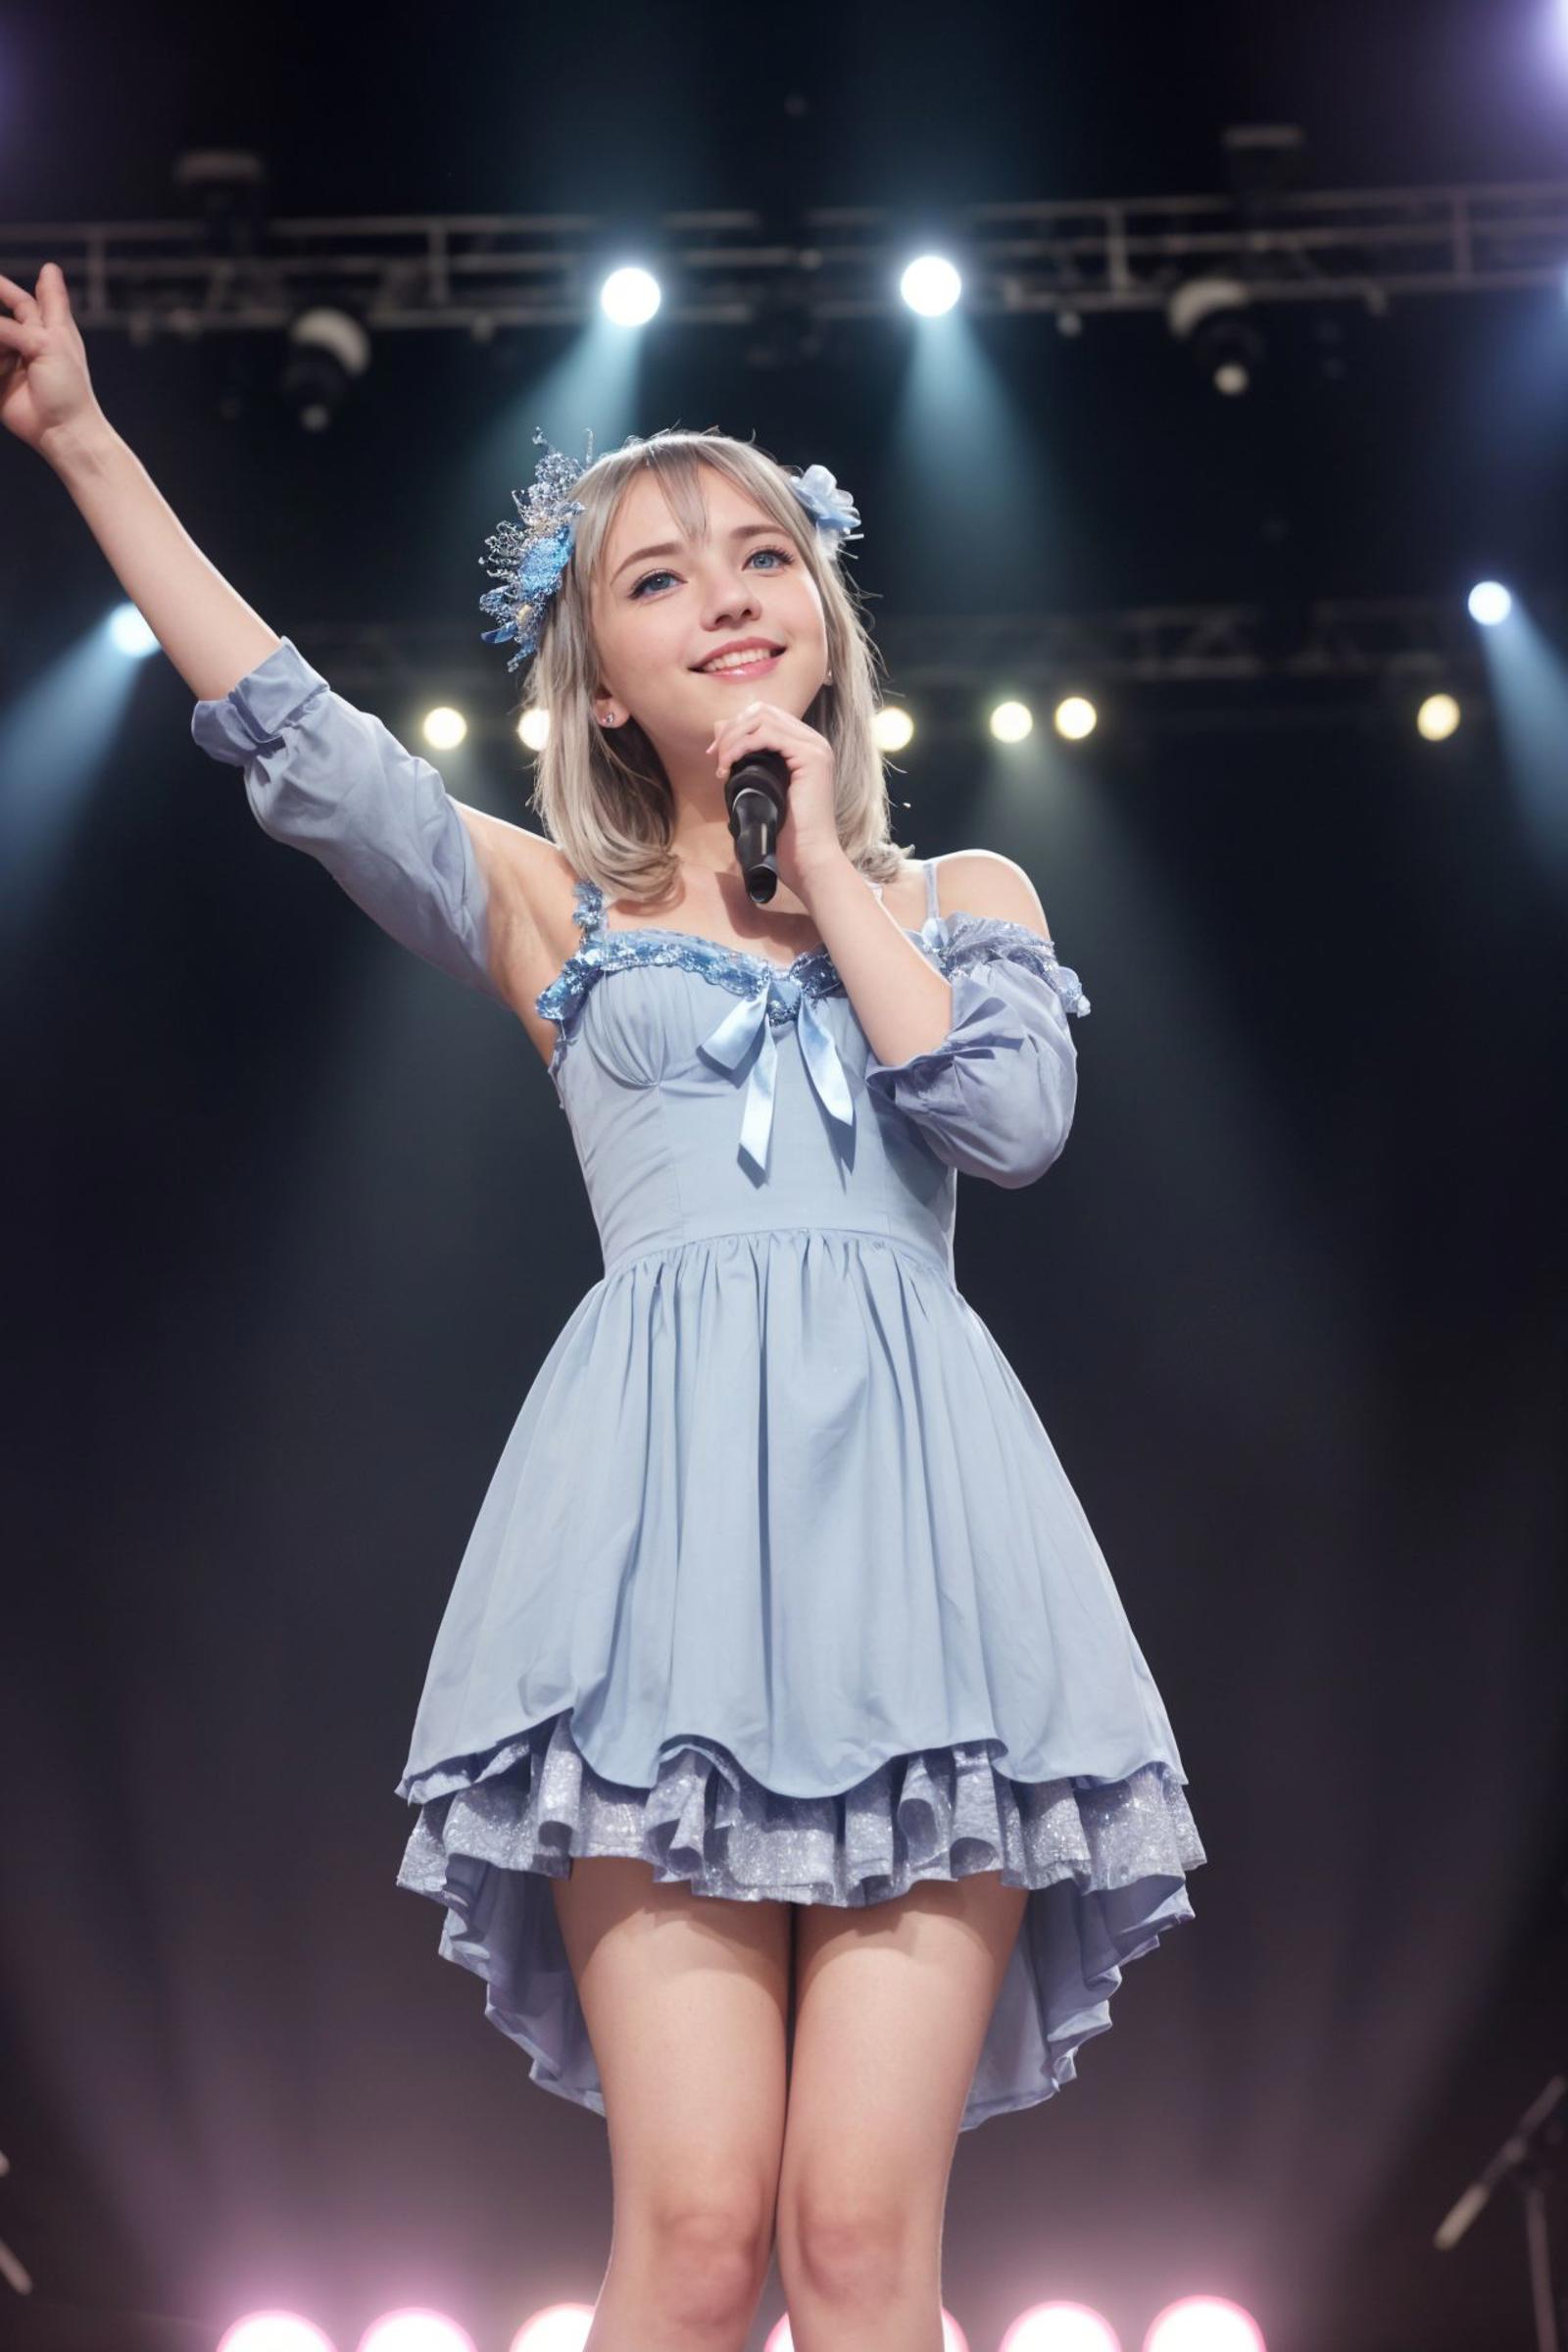 A young girl wearing a blue dress stands on stage with her arms raised, possibly singing into a microphone.